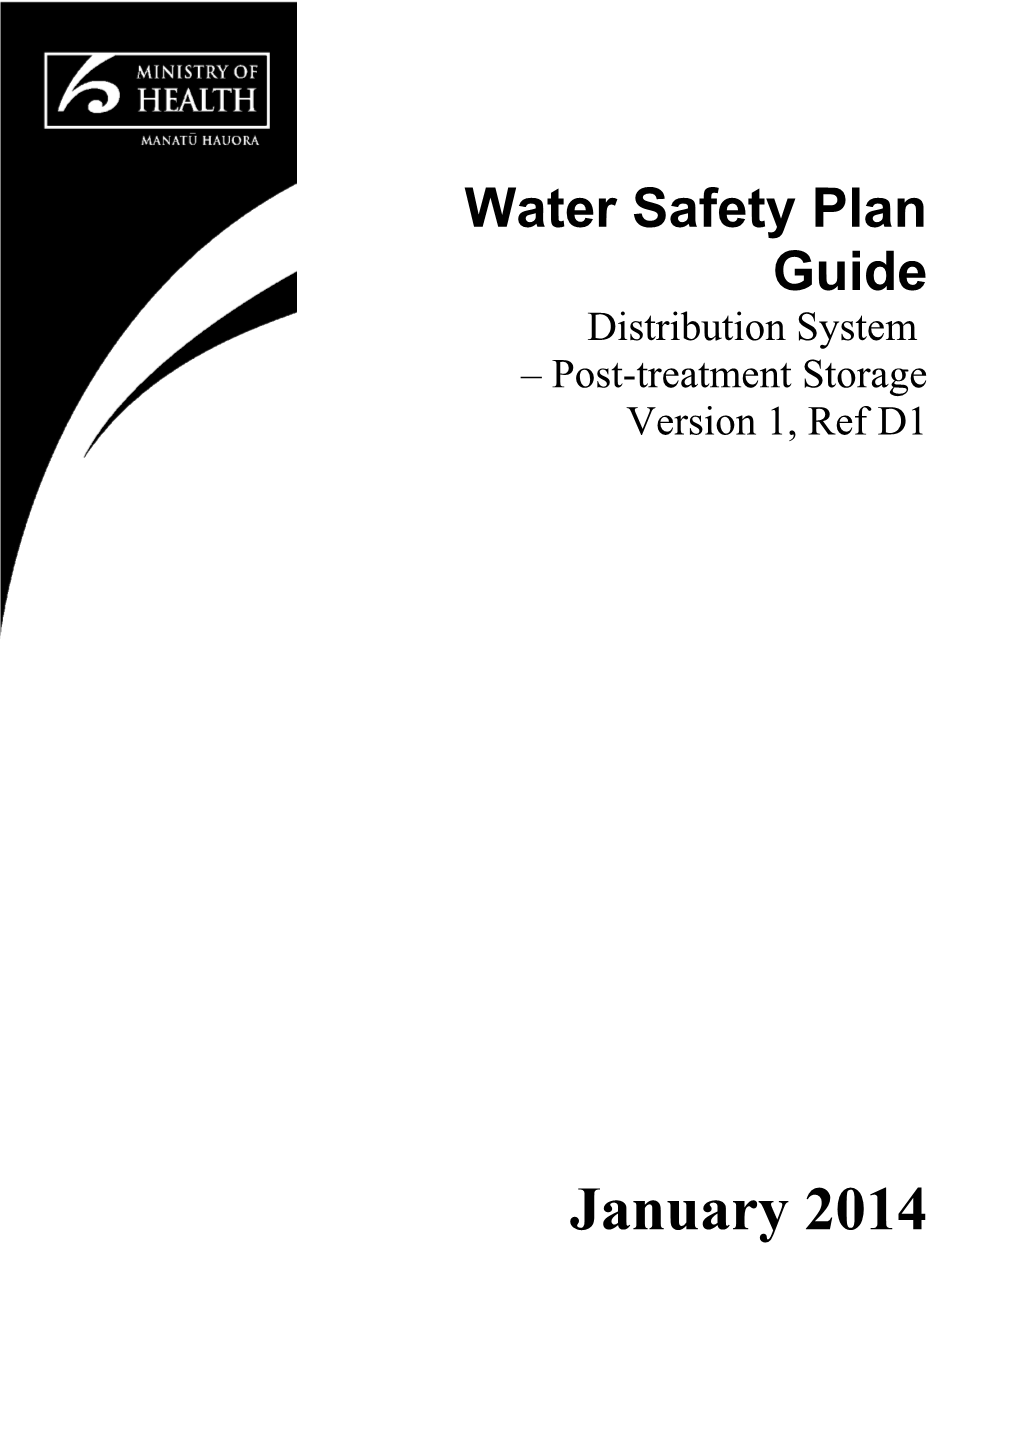 Water Safety Plan Guide: Distribution System Post-Treatment Storage